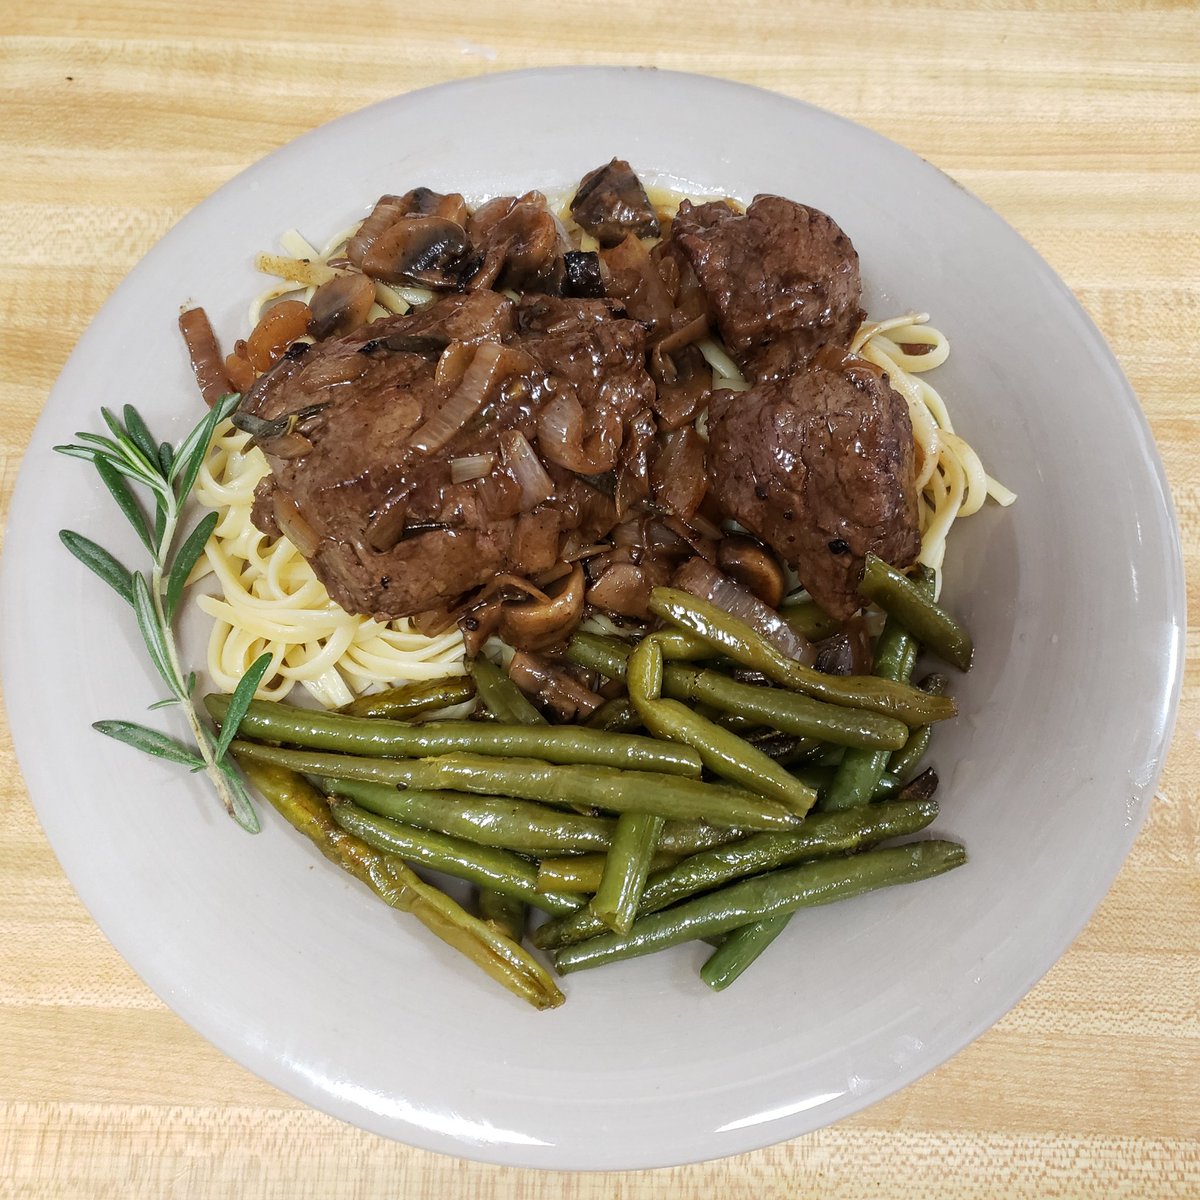 Homemade filet mignon in marsala sauce with mushrooms and shallots, over linguine with sauteed green beans in garlic butter. With @TheJackalAgenda and @Aster_Lodern 🥩🍝